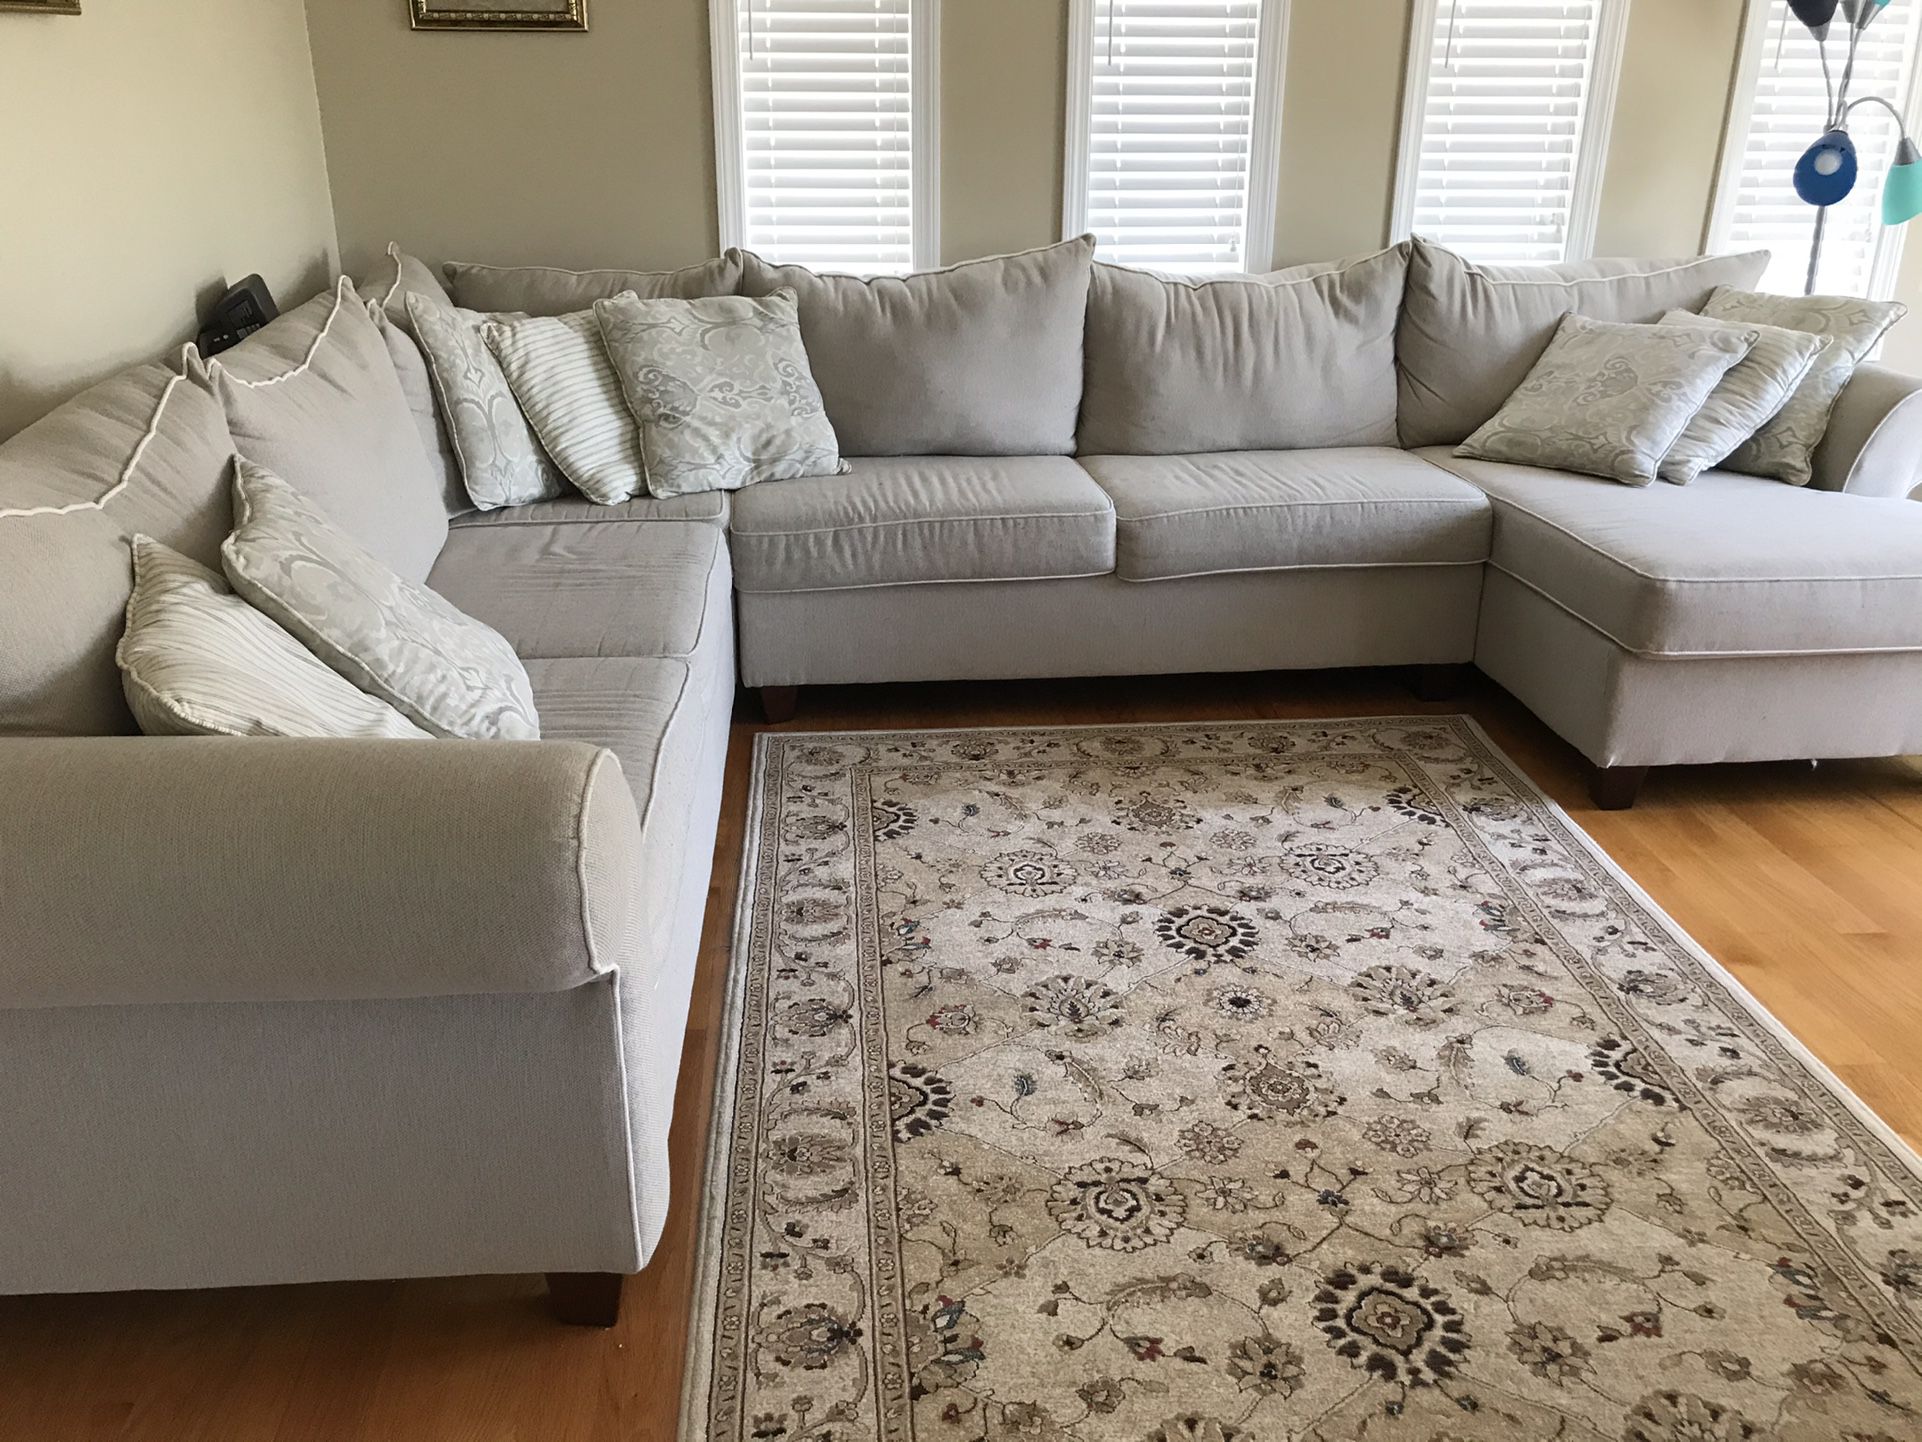 Sectional Sofa set with Pillows Included